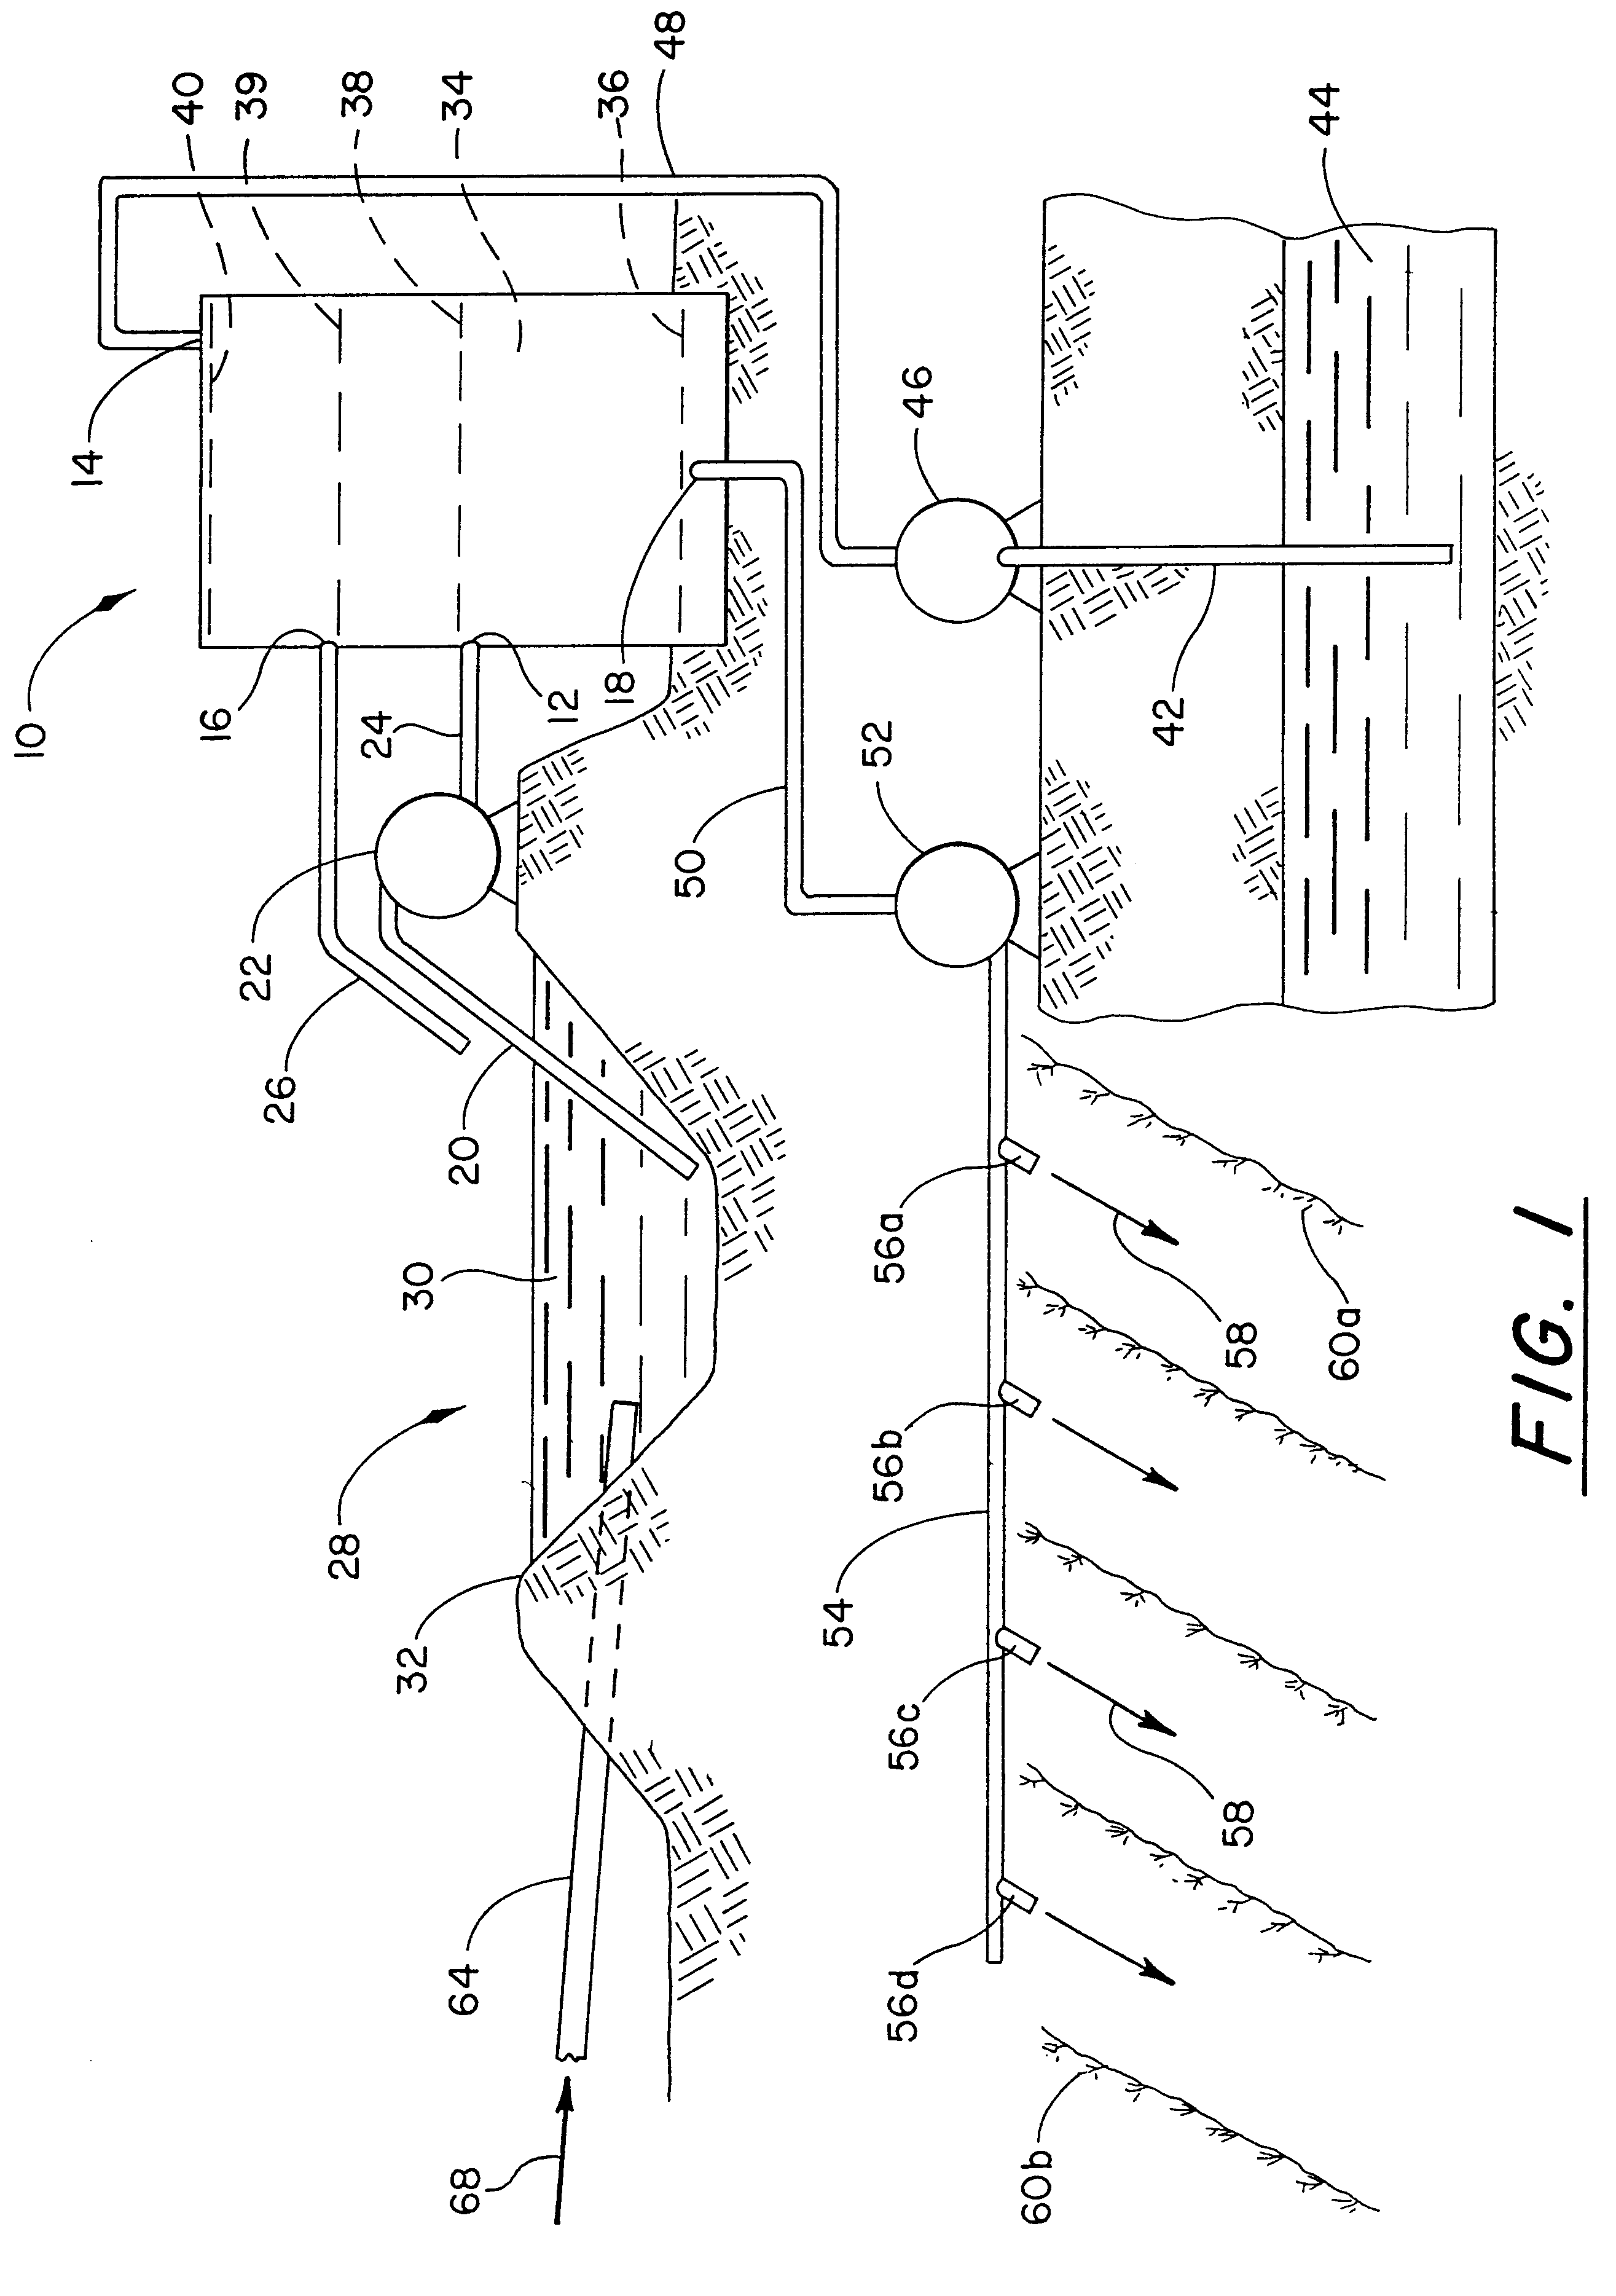 Apparatus for preventing contamination of a fresh water source by grey water to be land applied